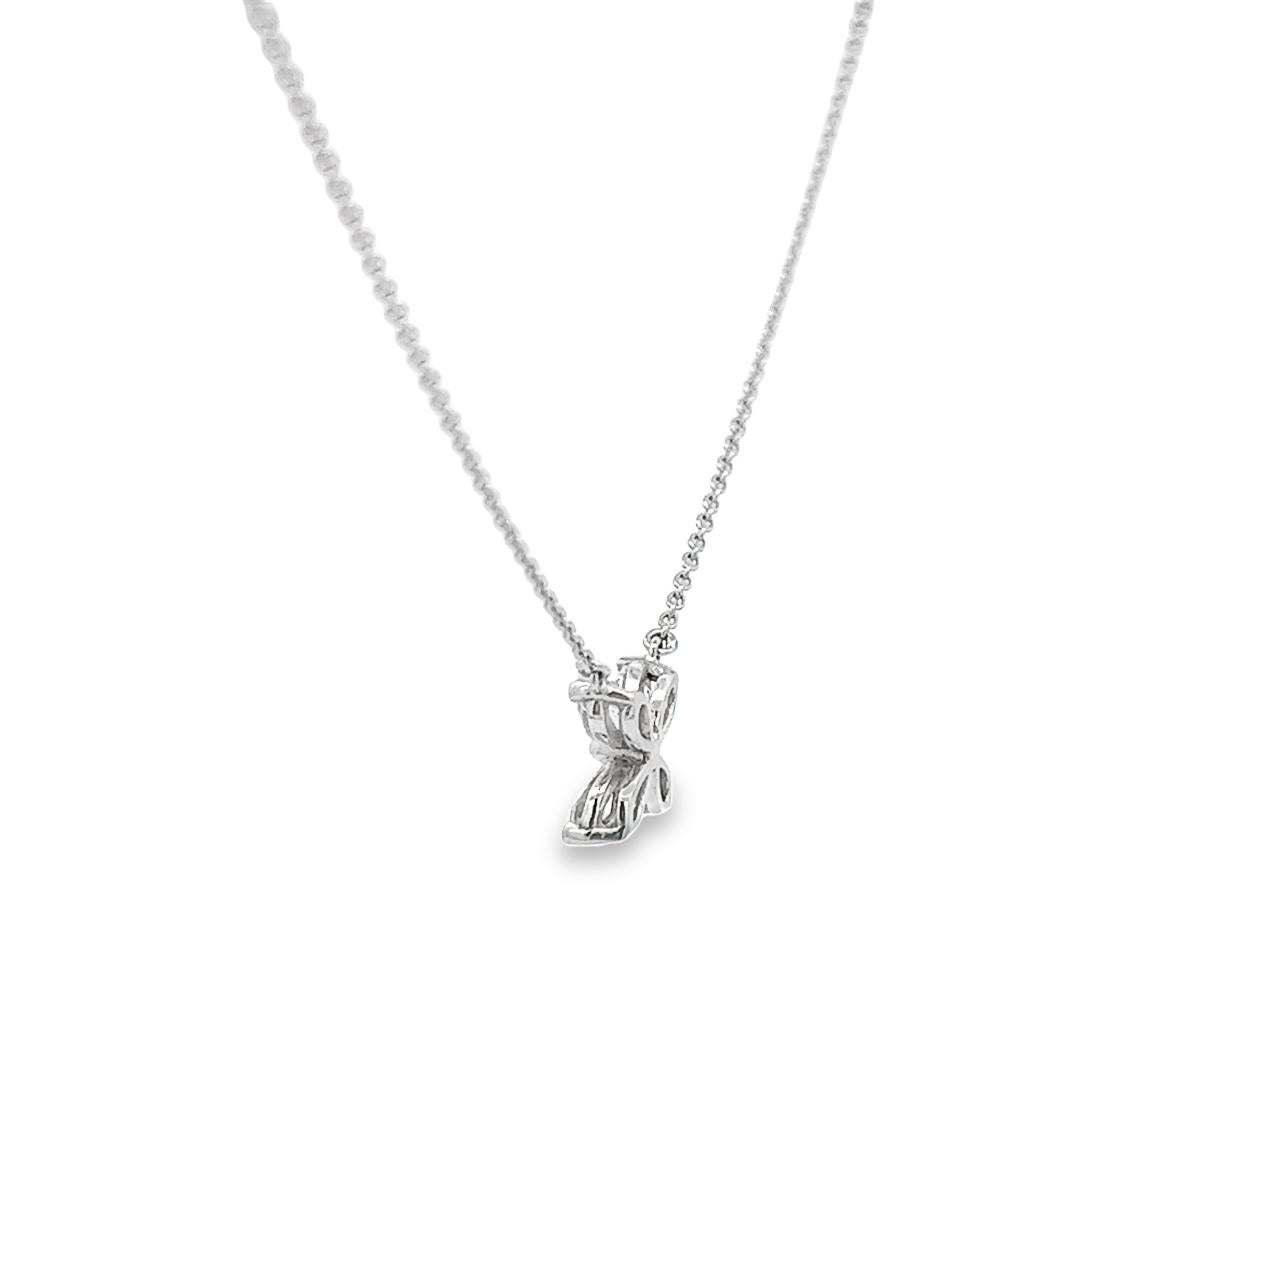 This pear-shaped diamond pendant is a must-have featuring a popular designer-inspired floral motif. The contemporary arrangement of the dazzling necklace not only results in an instant classic but is sure to make a statement. With its stunning and